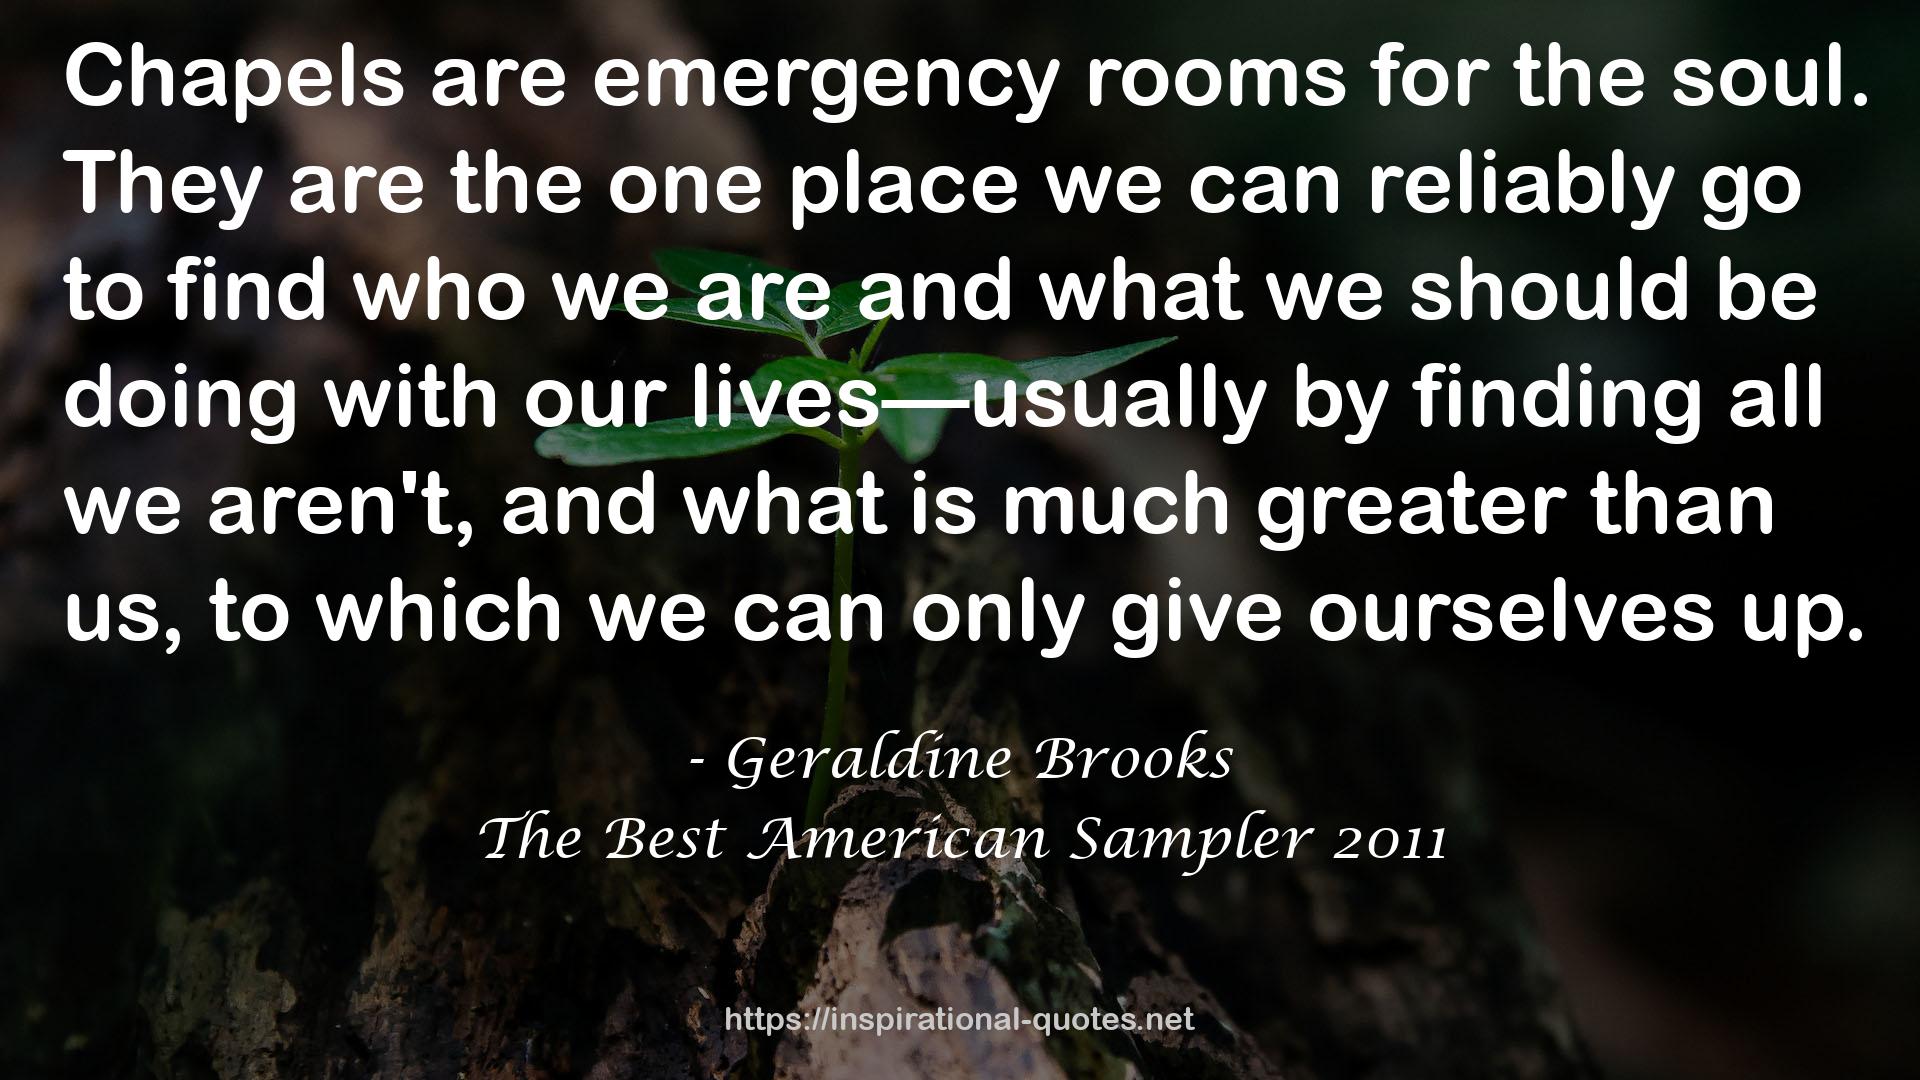 The Best American Sampler 2011 QUOTES